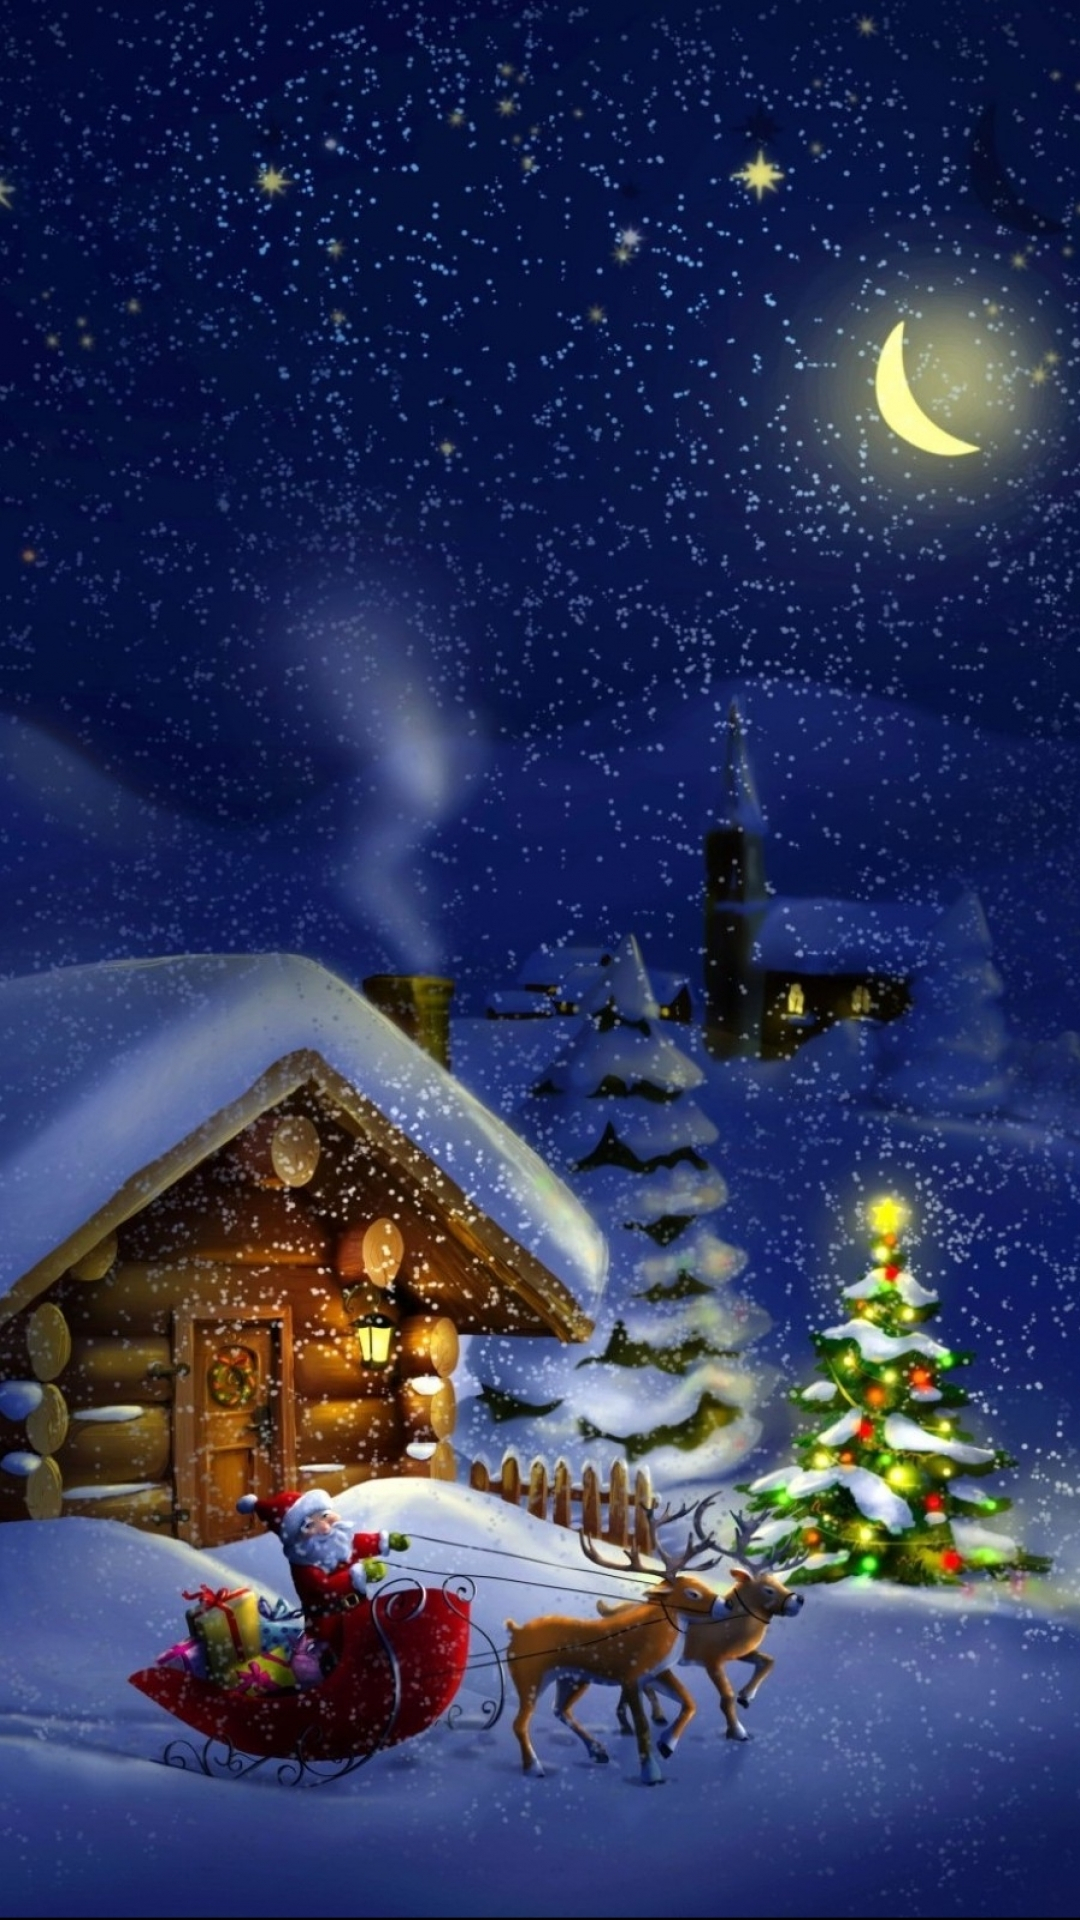 1080x1920 Free download Christmas iPhone 7 Wallpaper [] for your Desktop, Mobile \u0026 Tablet | Explore 51+ Christmas Yule Wallpapers | Christmas Yule Wallpapers, Yule Wallpaper Pagan, Free Yule Wallpaper